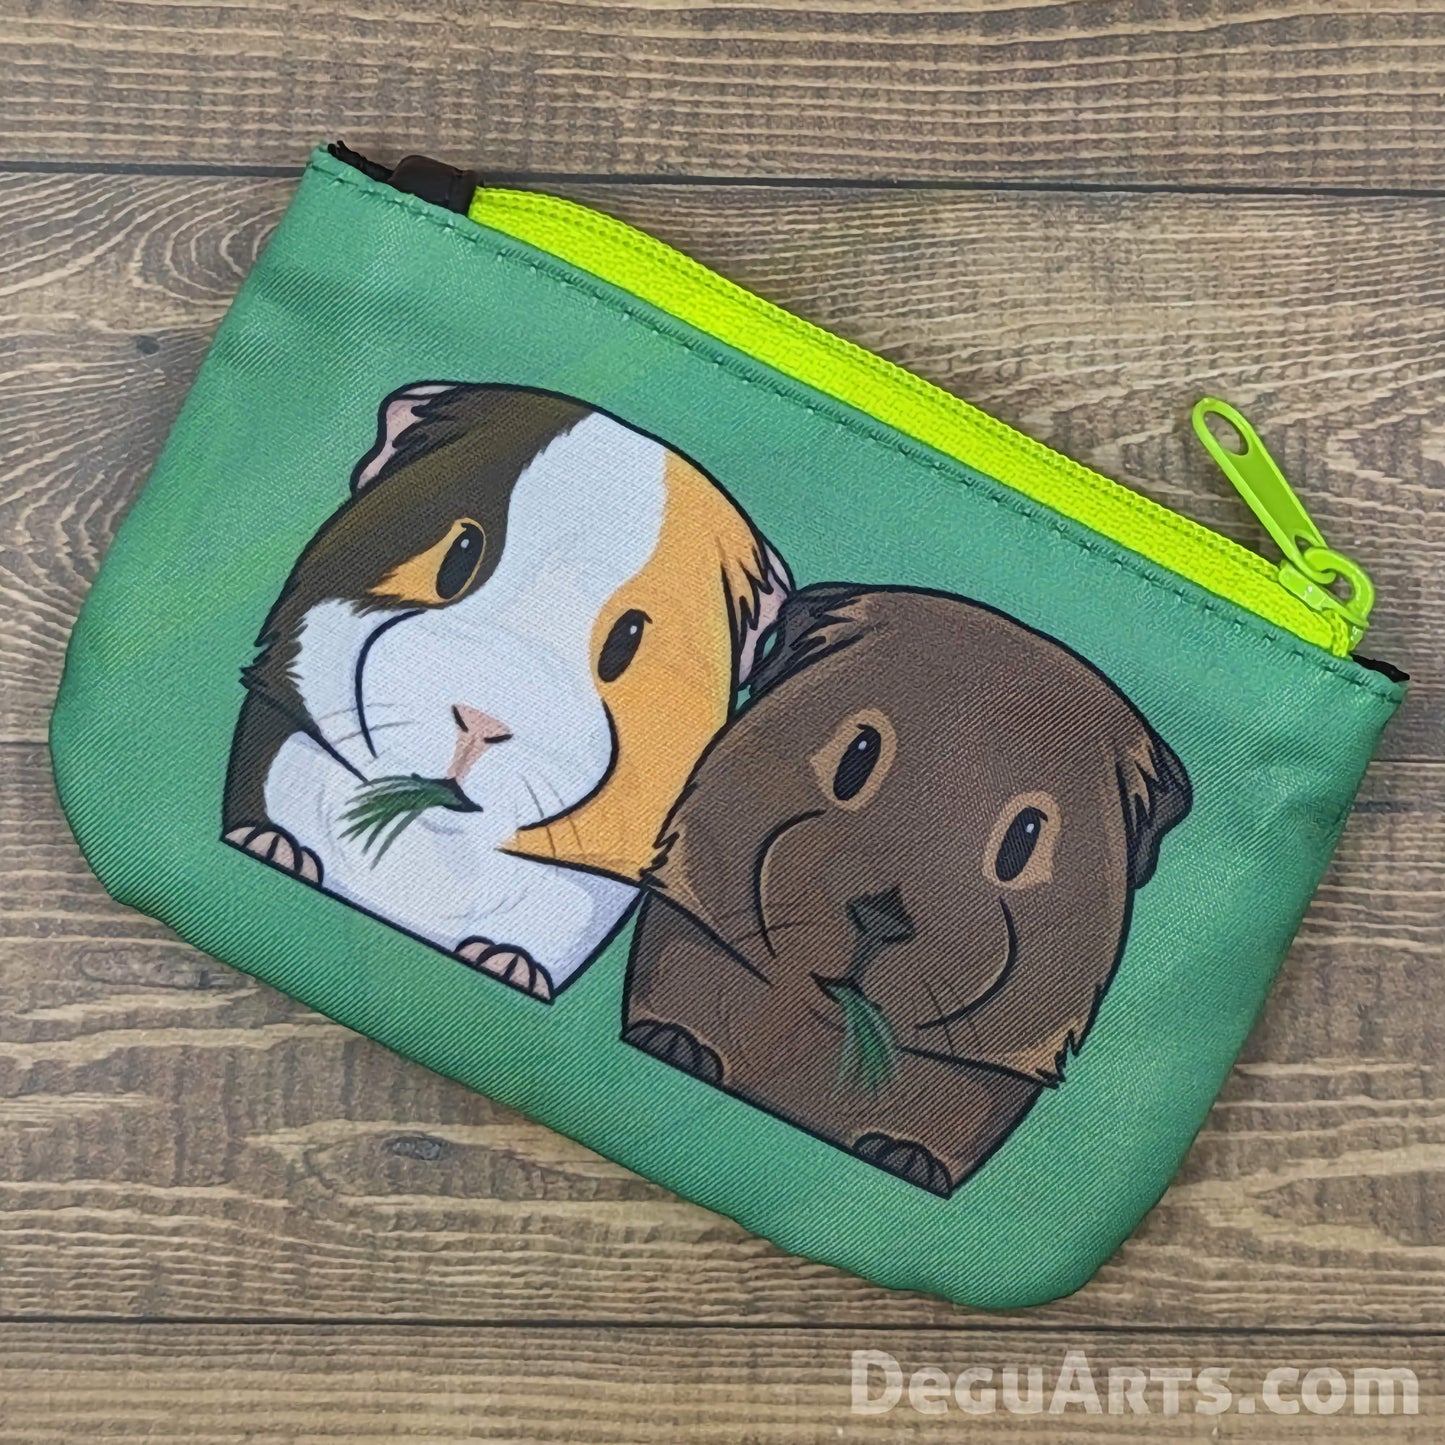 Guinea Pig Coin Pouch